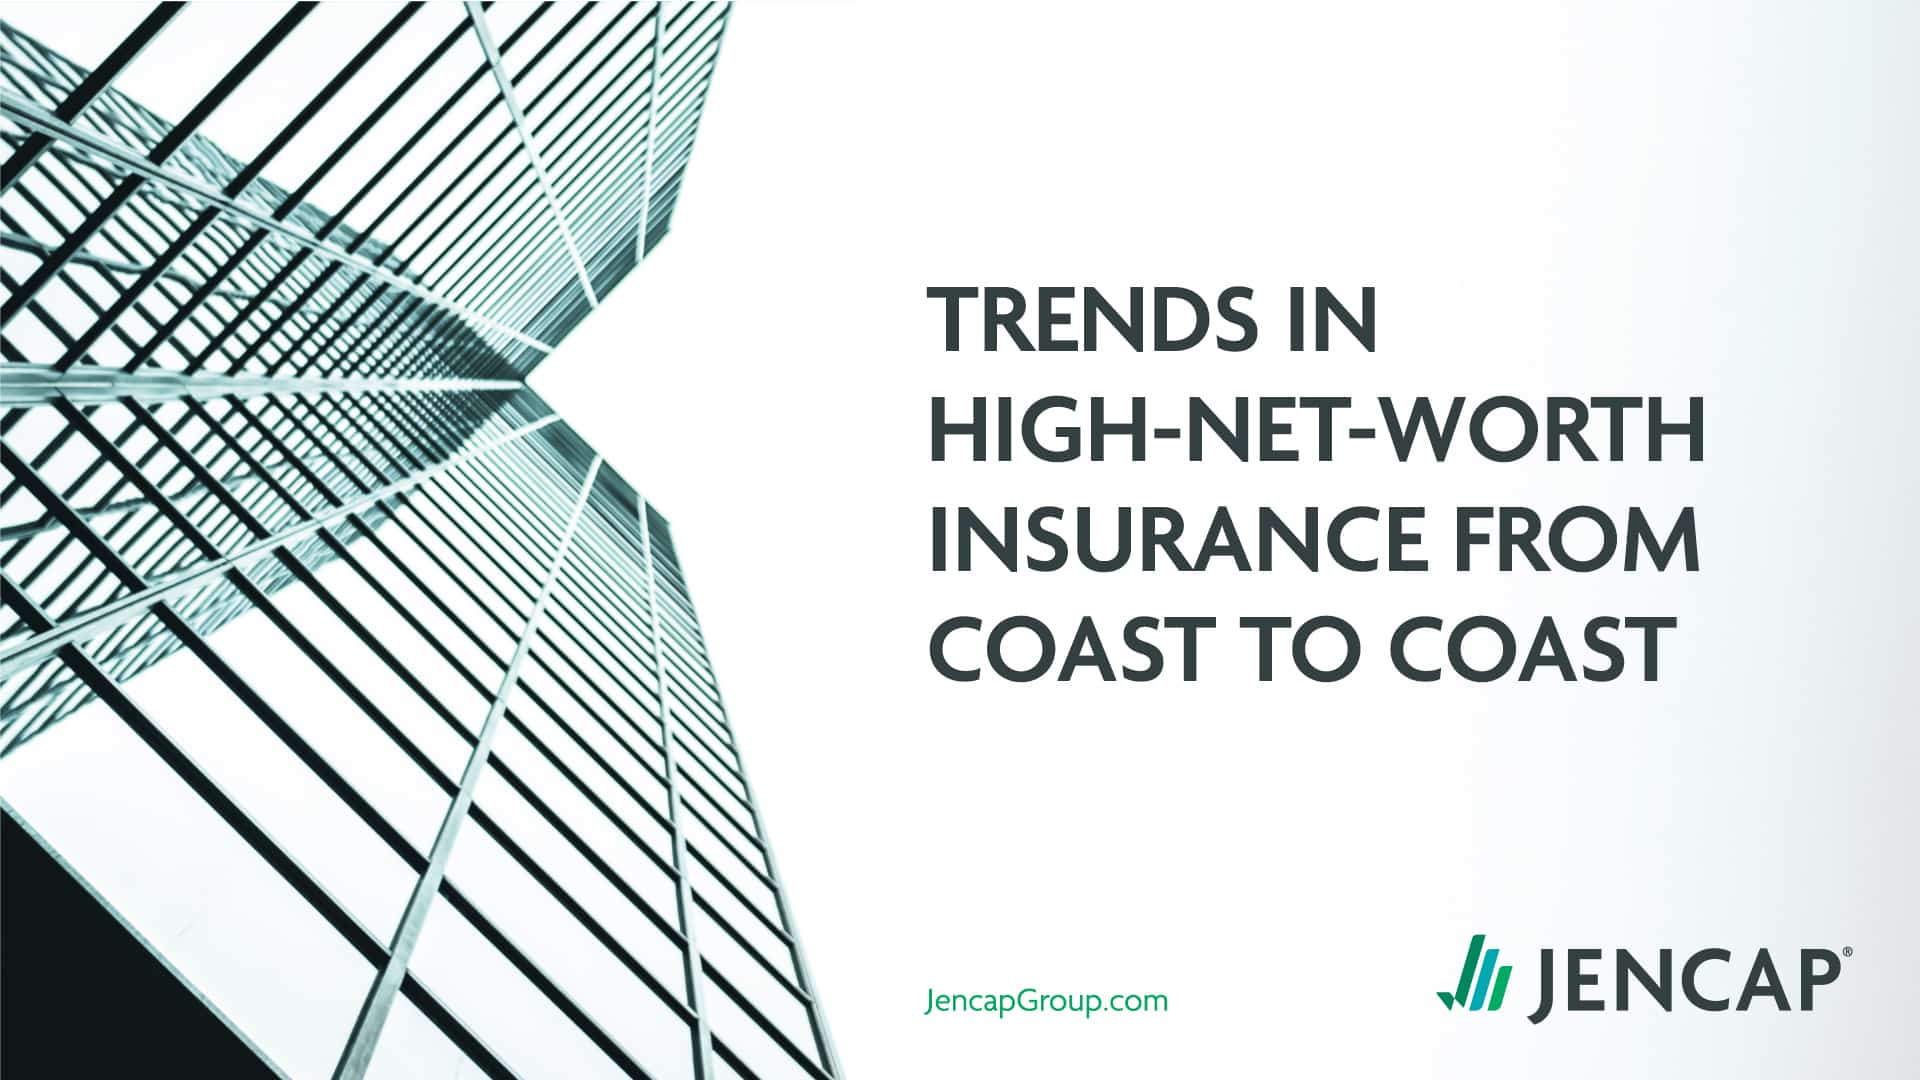 Trends in High-Net-Worth Insurance from Coast to Coast